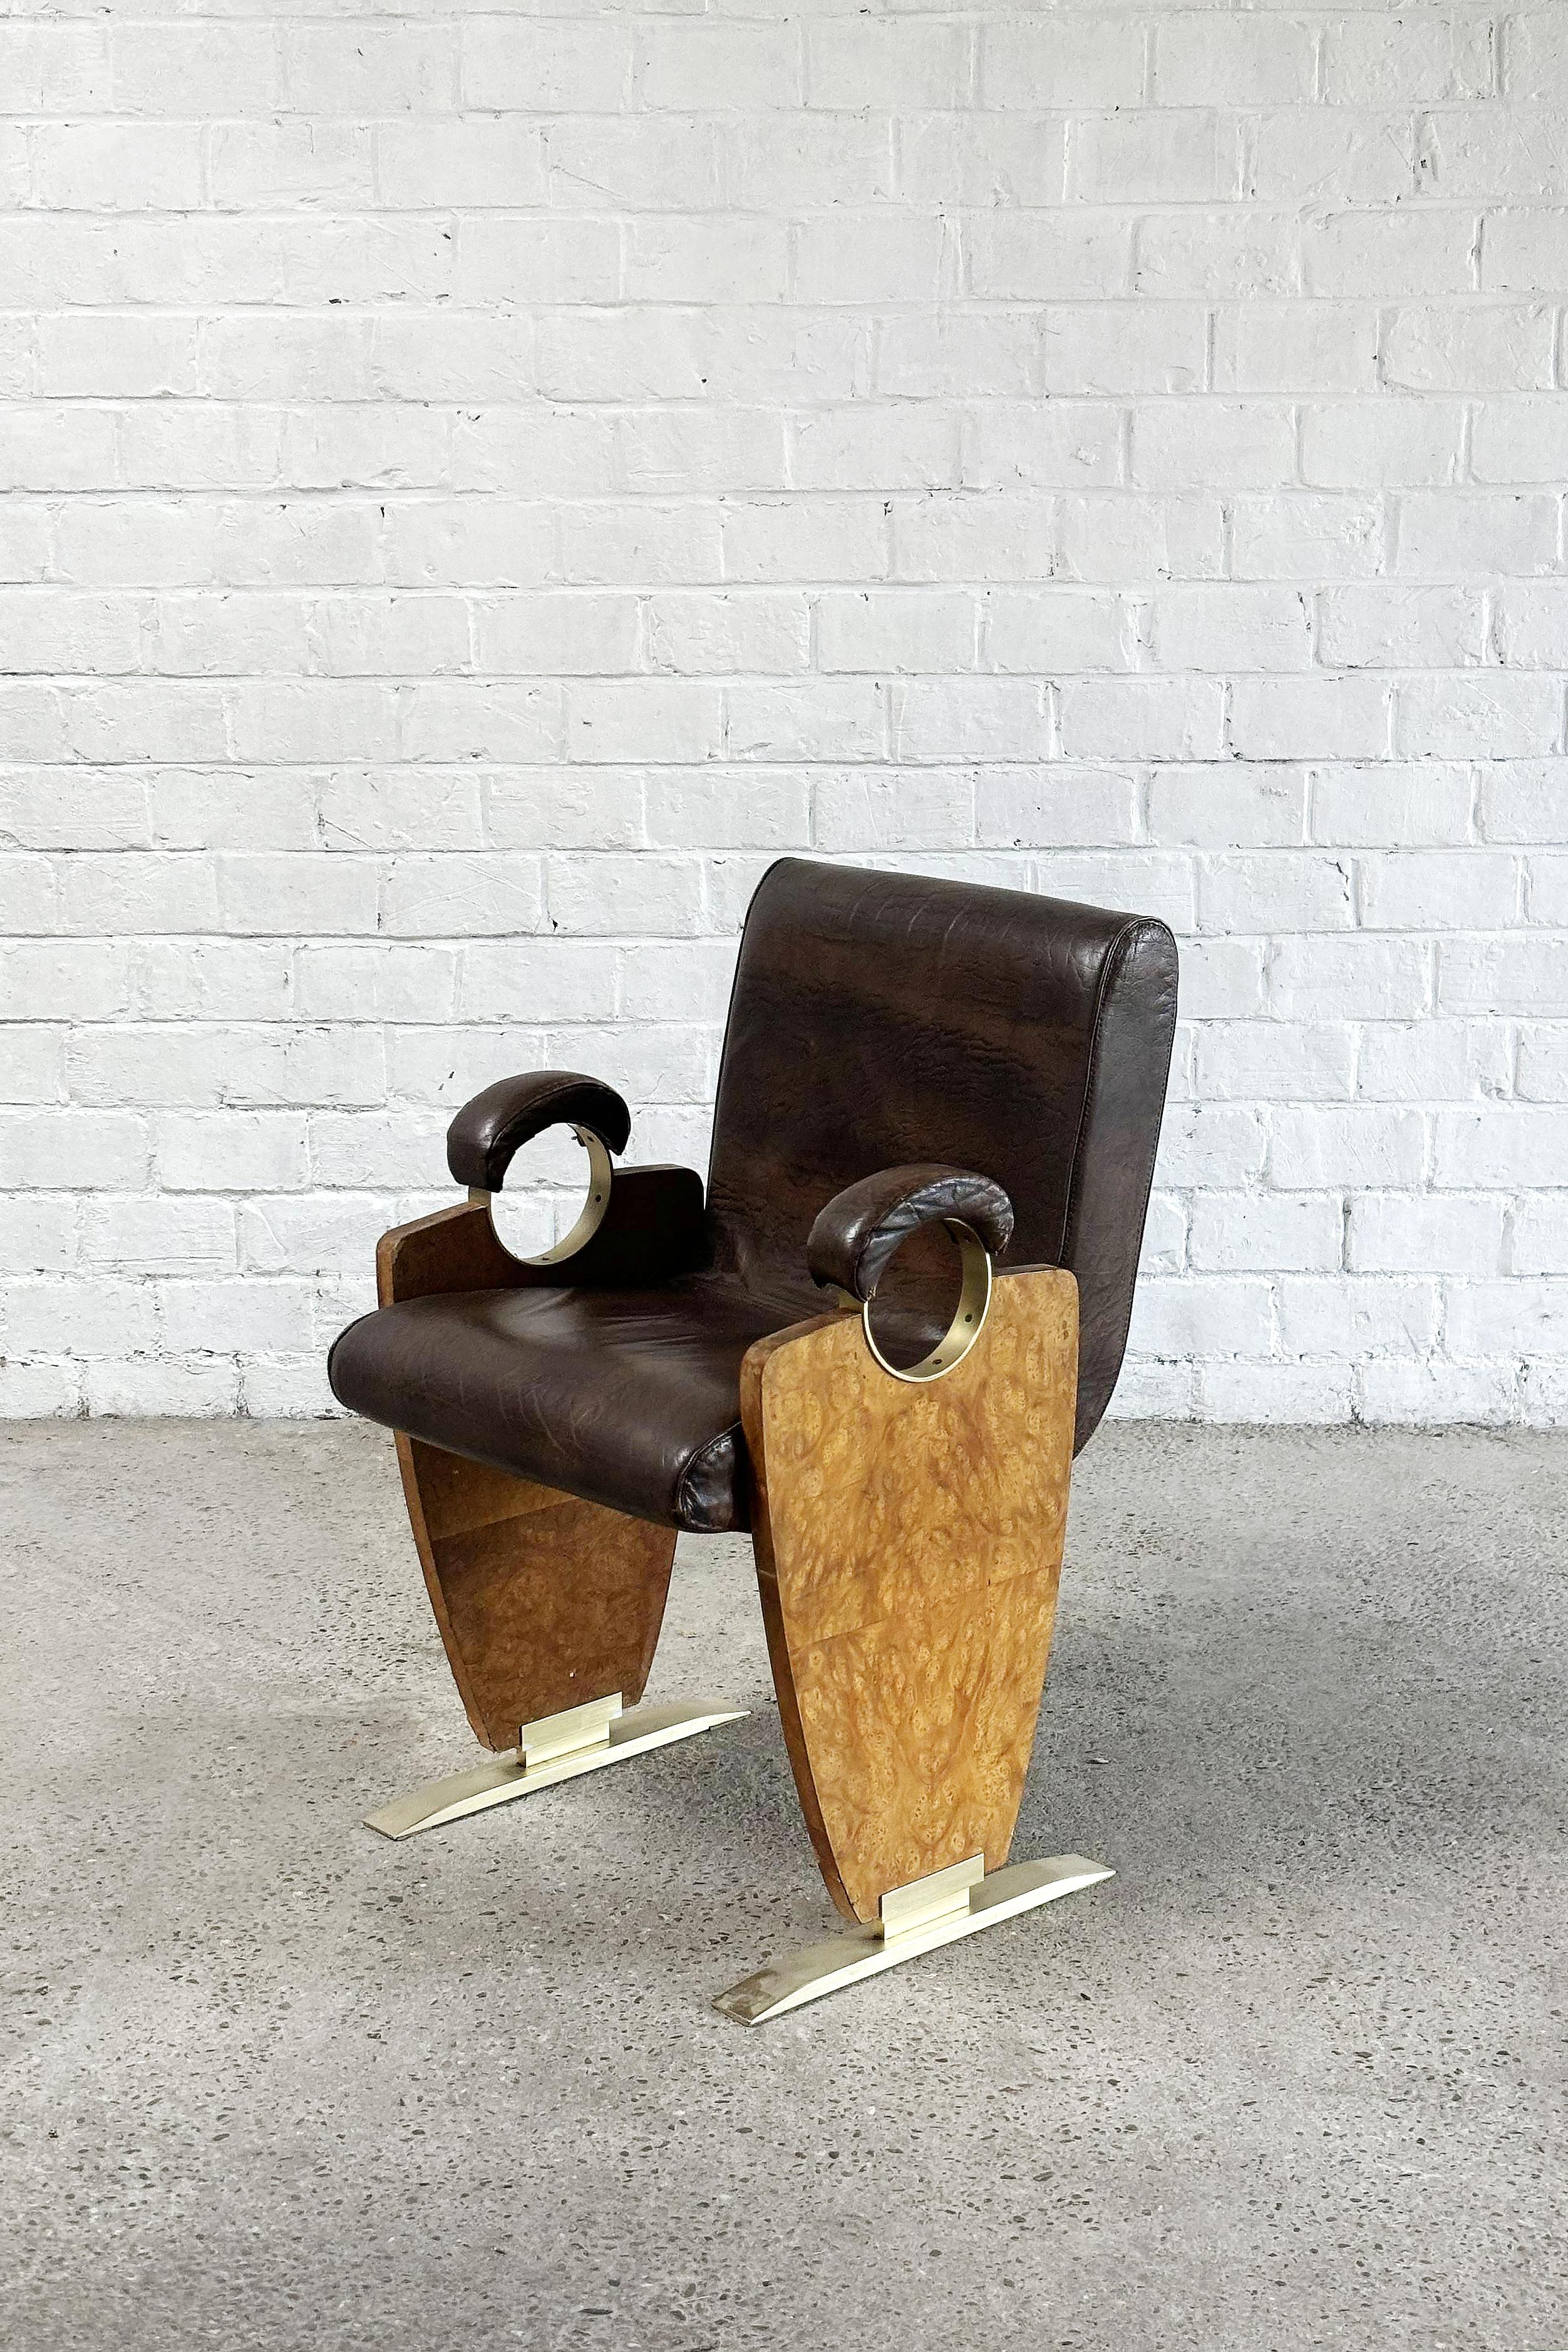 European Decorative Leather & Burl Wood Art-Deco Style Lounge Or Side chair, 1970's For Sale